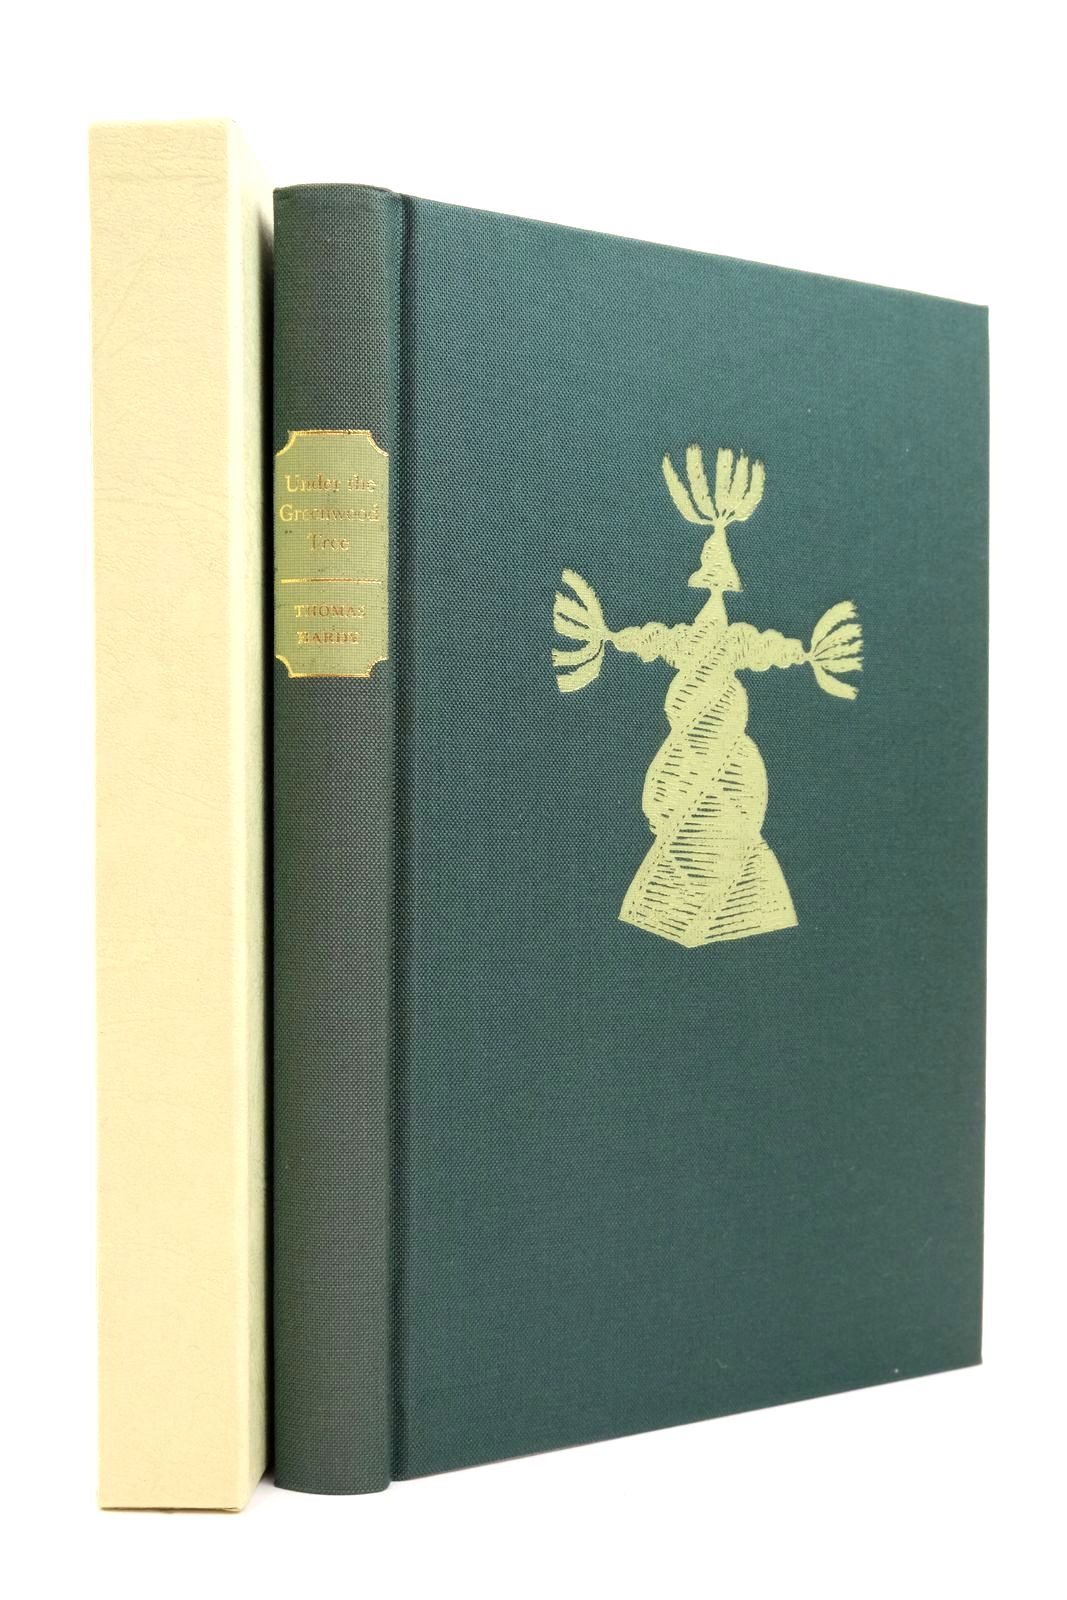 Photo of UNDER THE GREENWOOD TREE written by Hardy, Thomas illustrated by Reddick, Peter published by Folio Society (STOCK CODE: 2138222)  for sale by Stella & Rose's Books